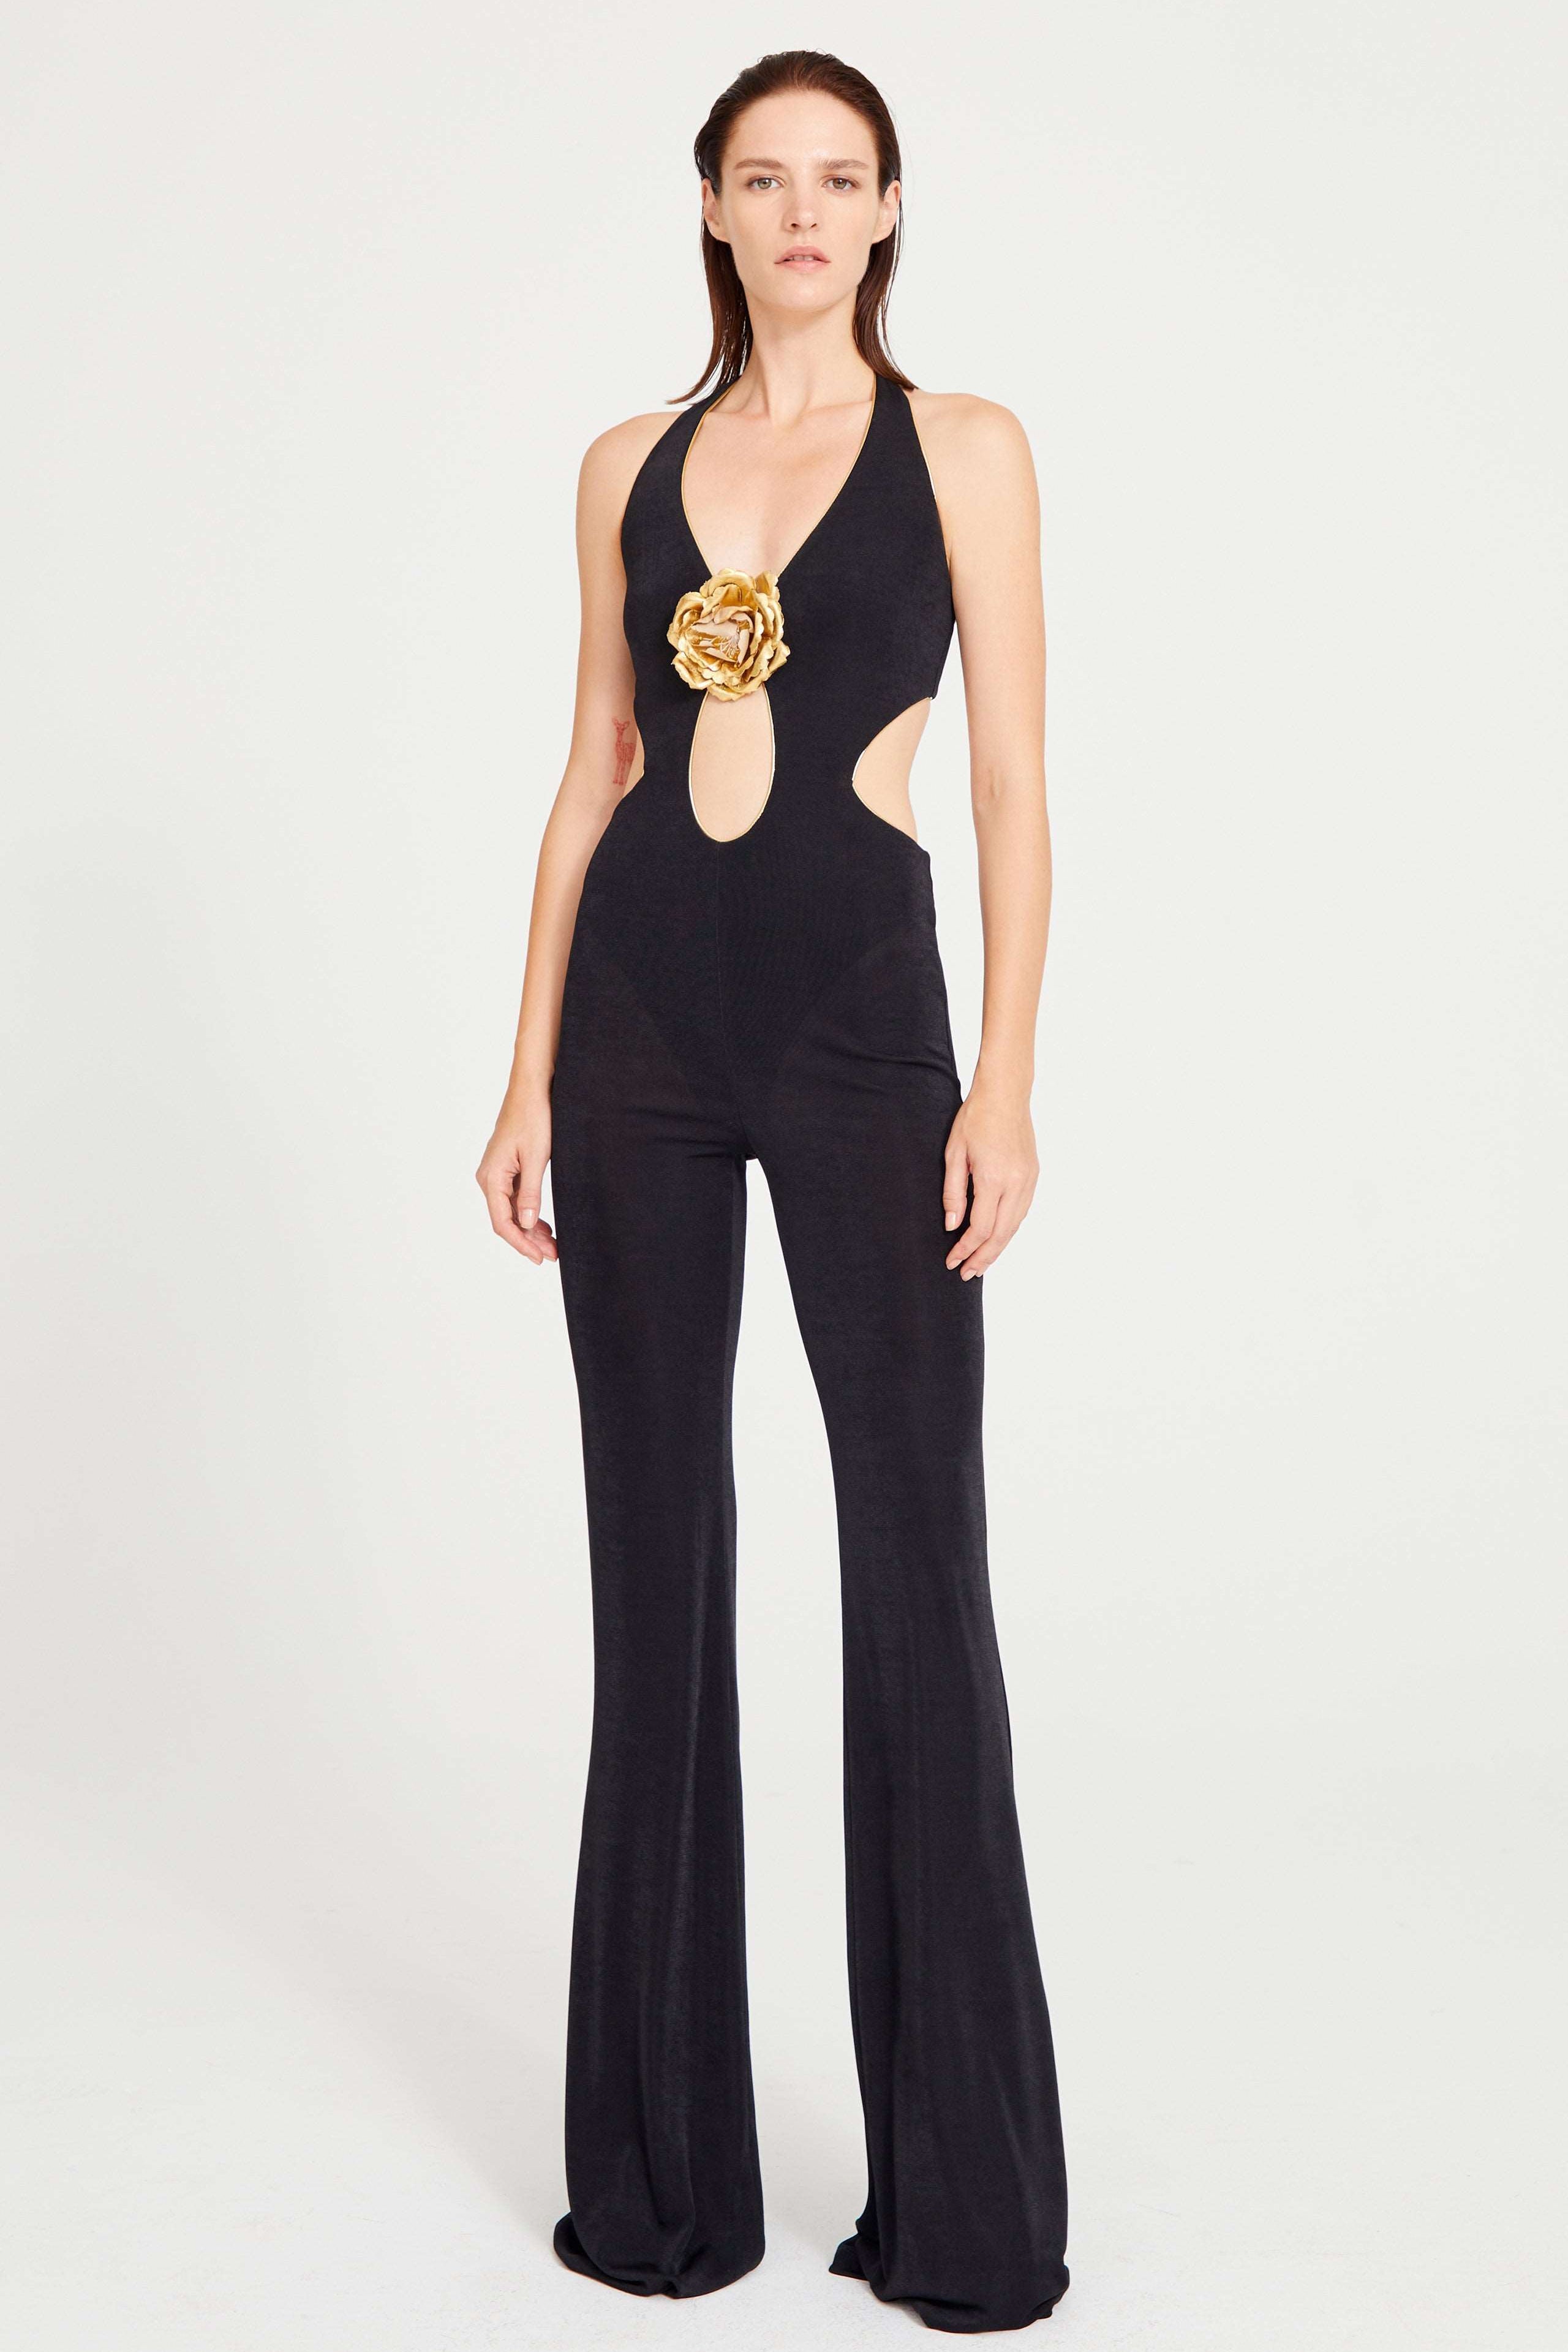 Black Jumpsuit With Gold Lining And Flower Details